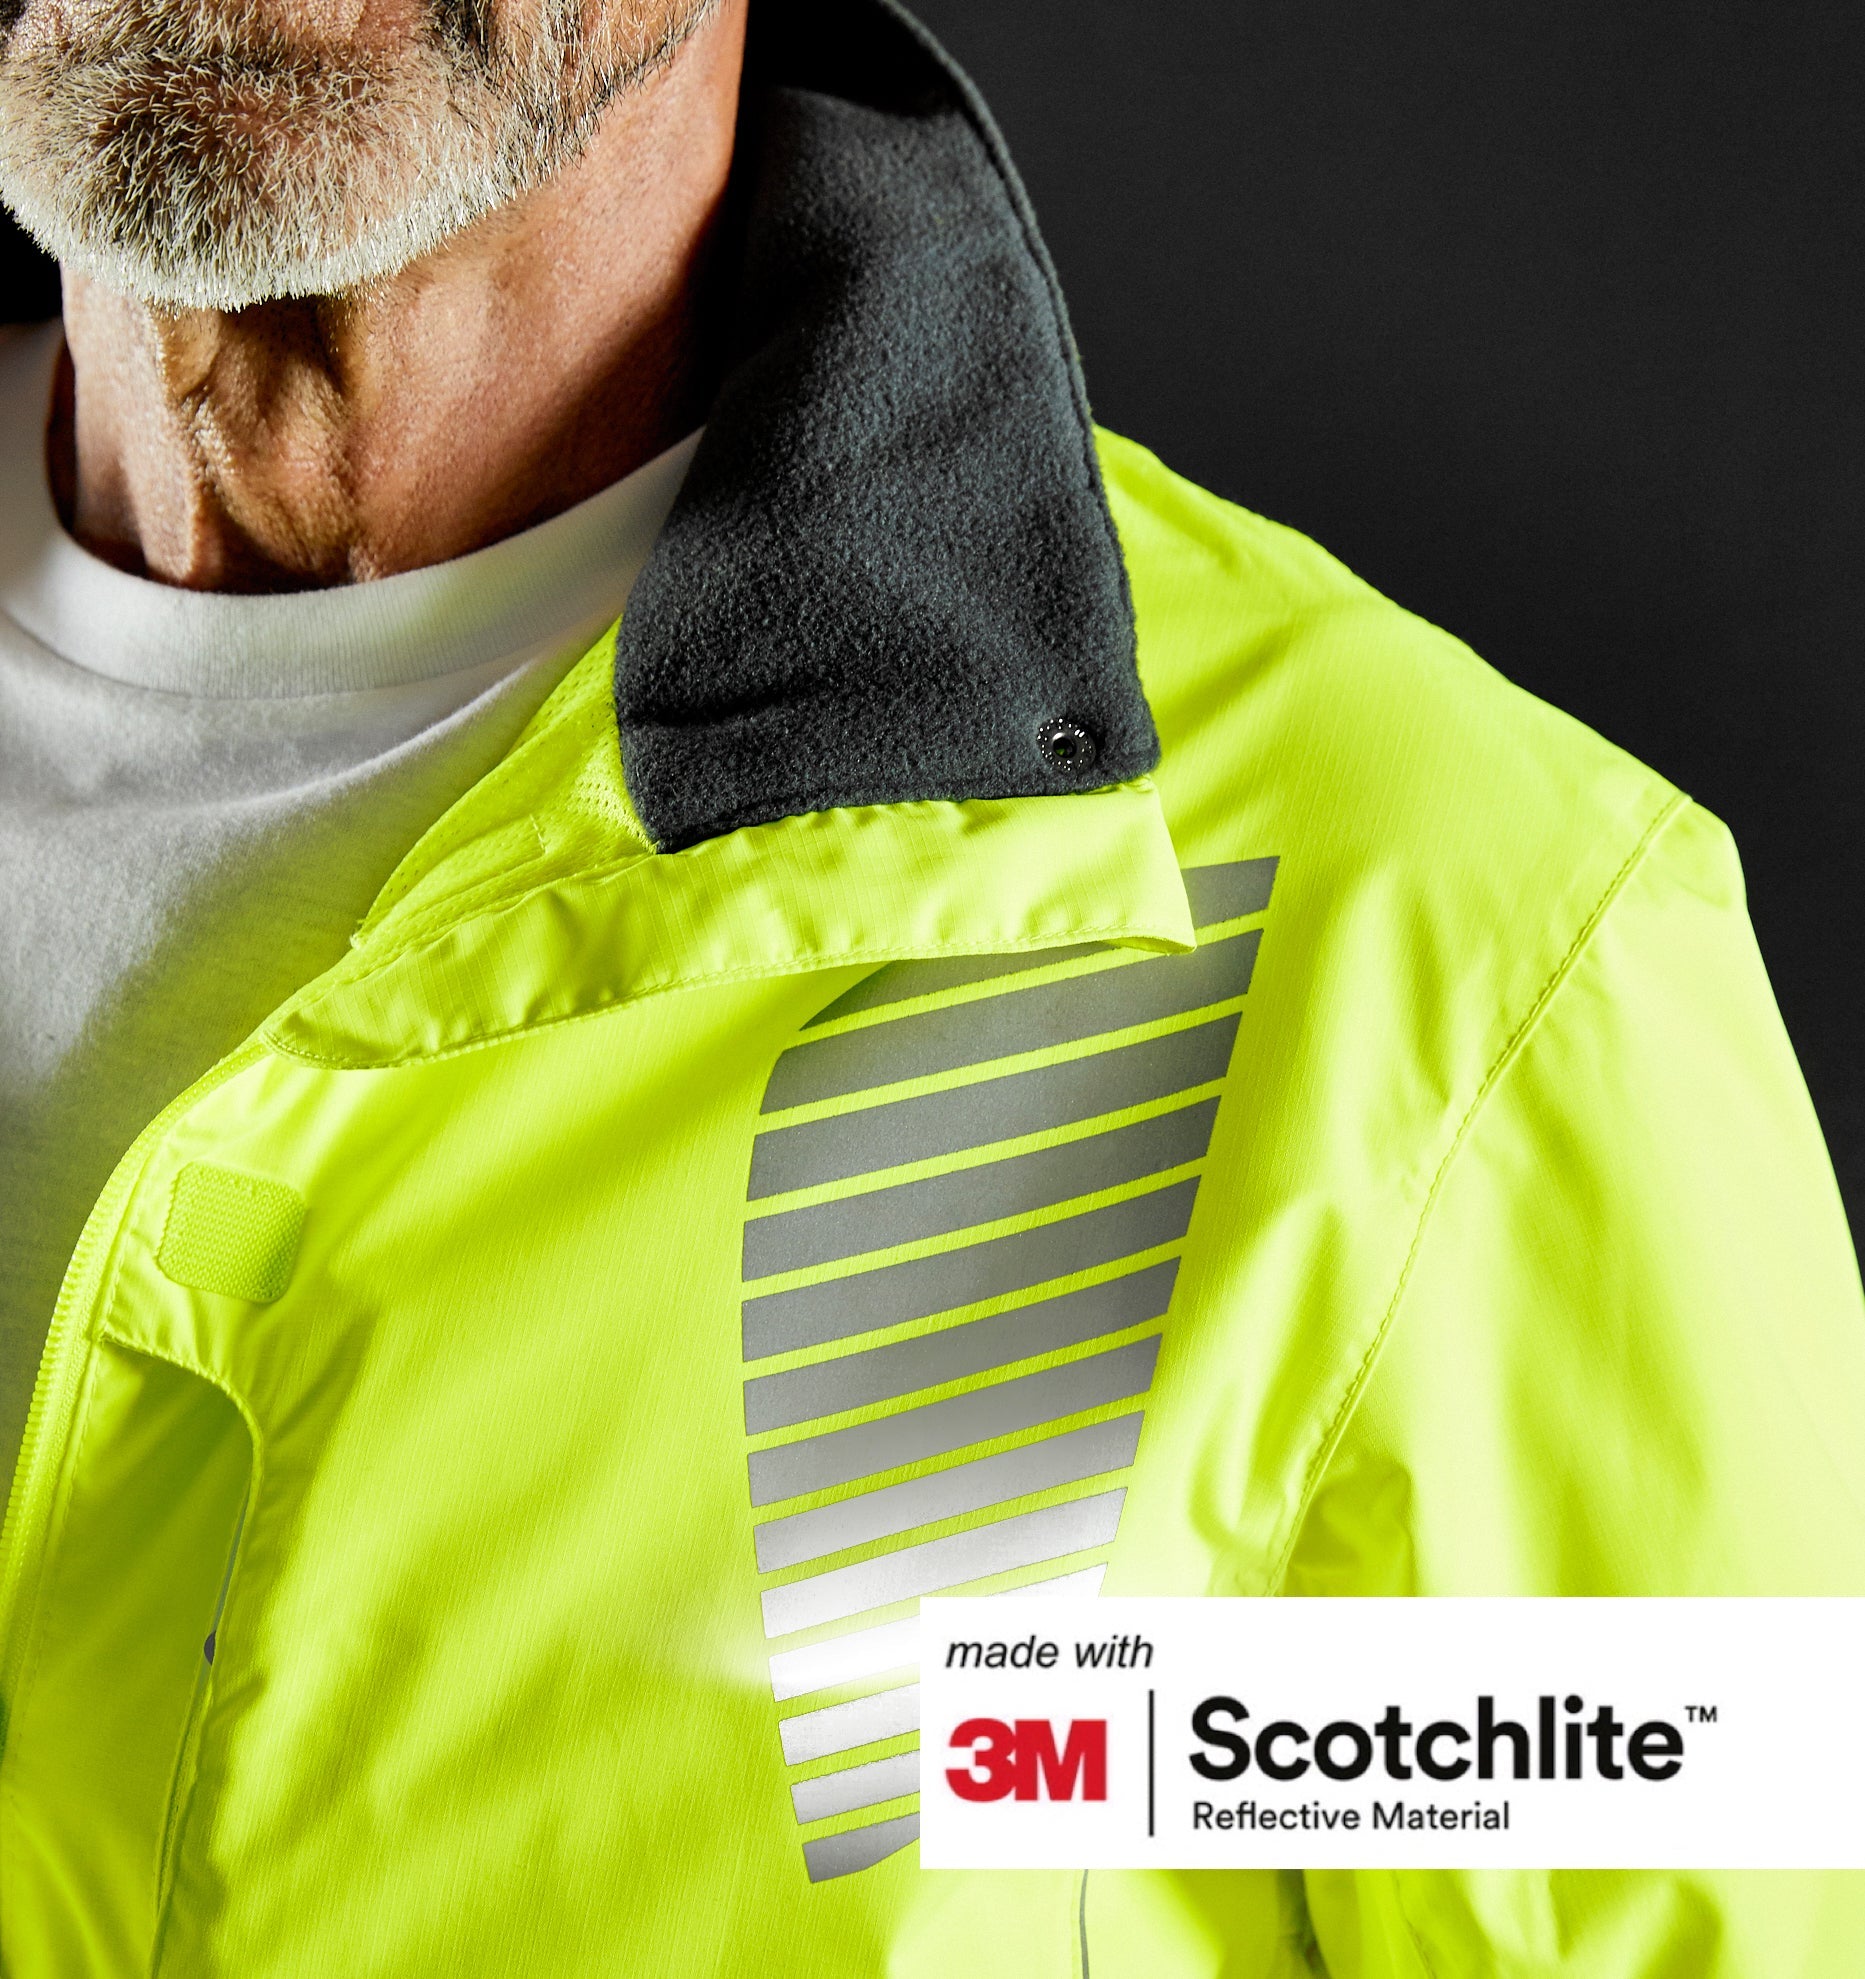 Close up of collar and reflective details of cycling jacket on person. 